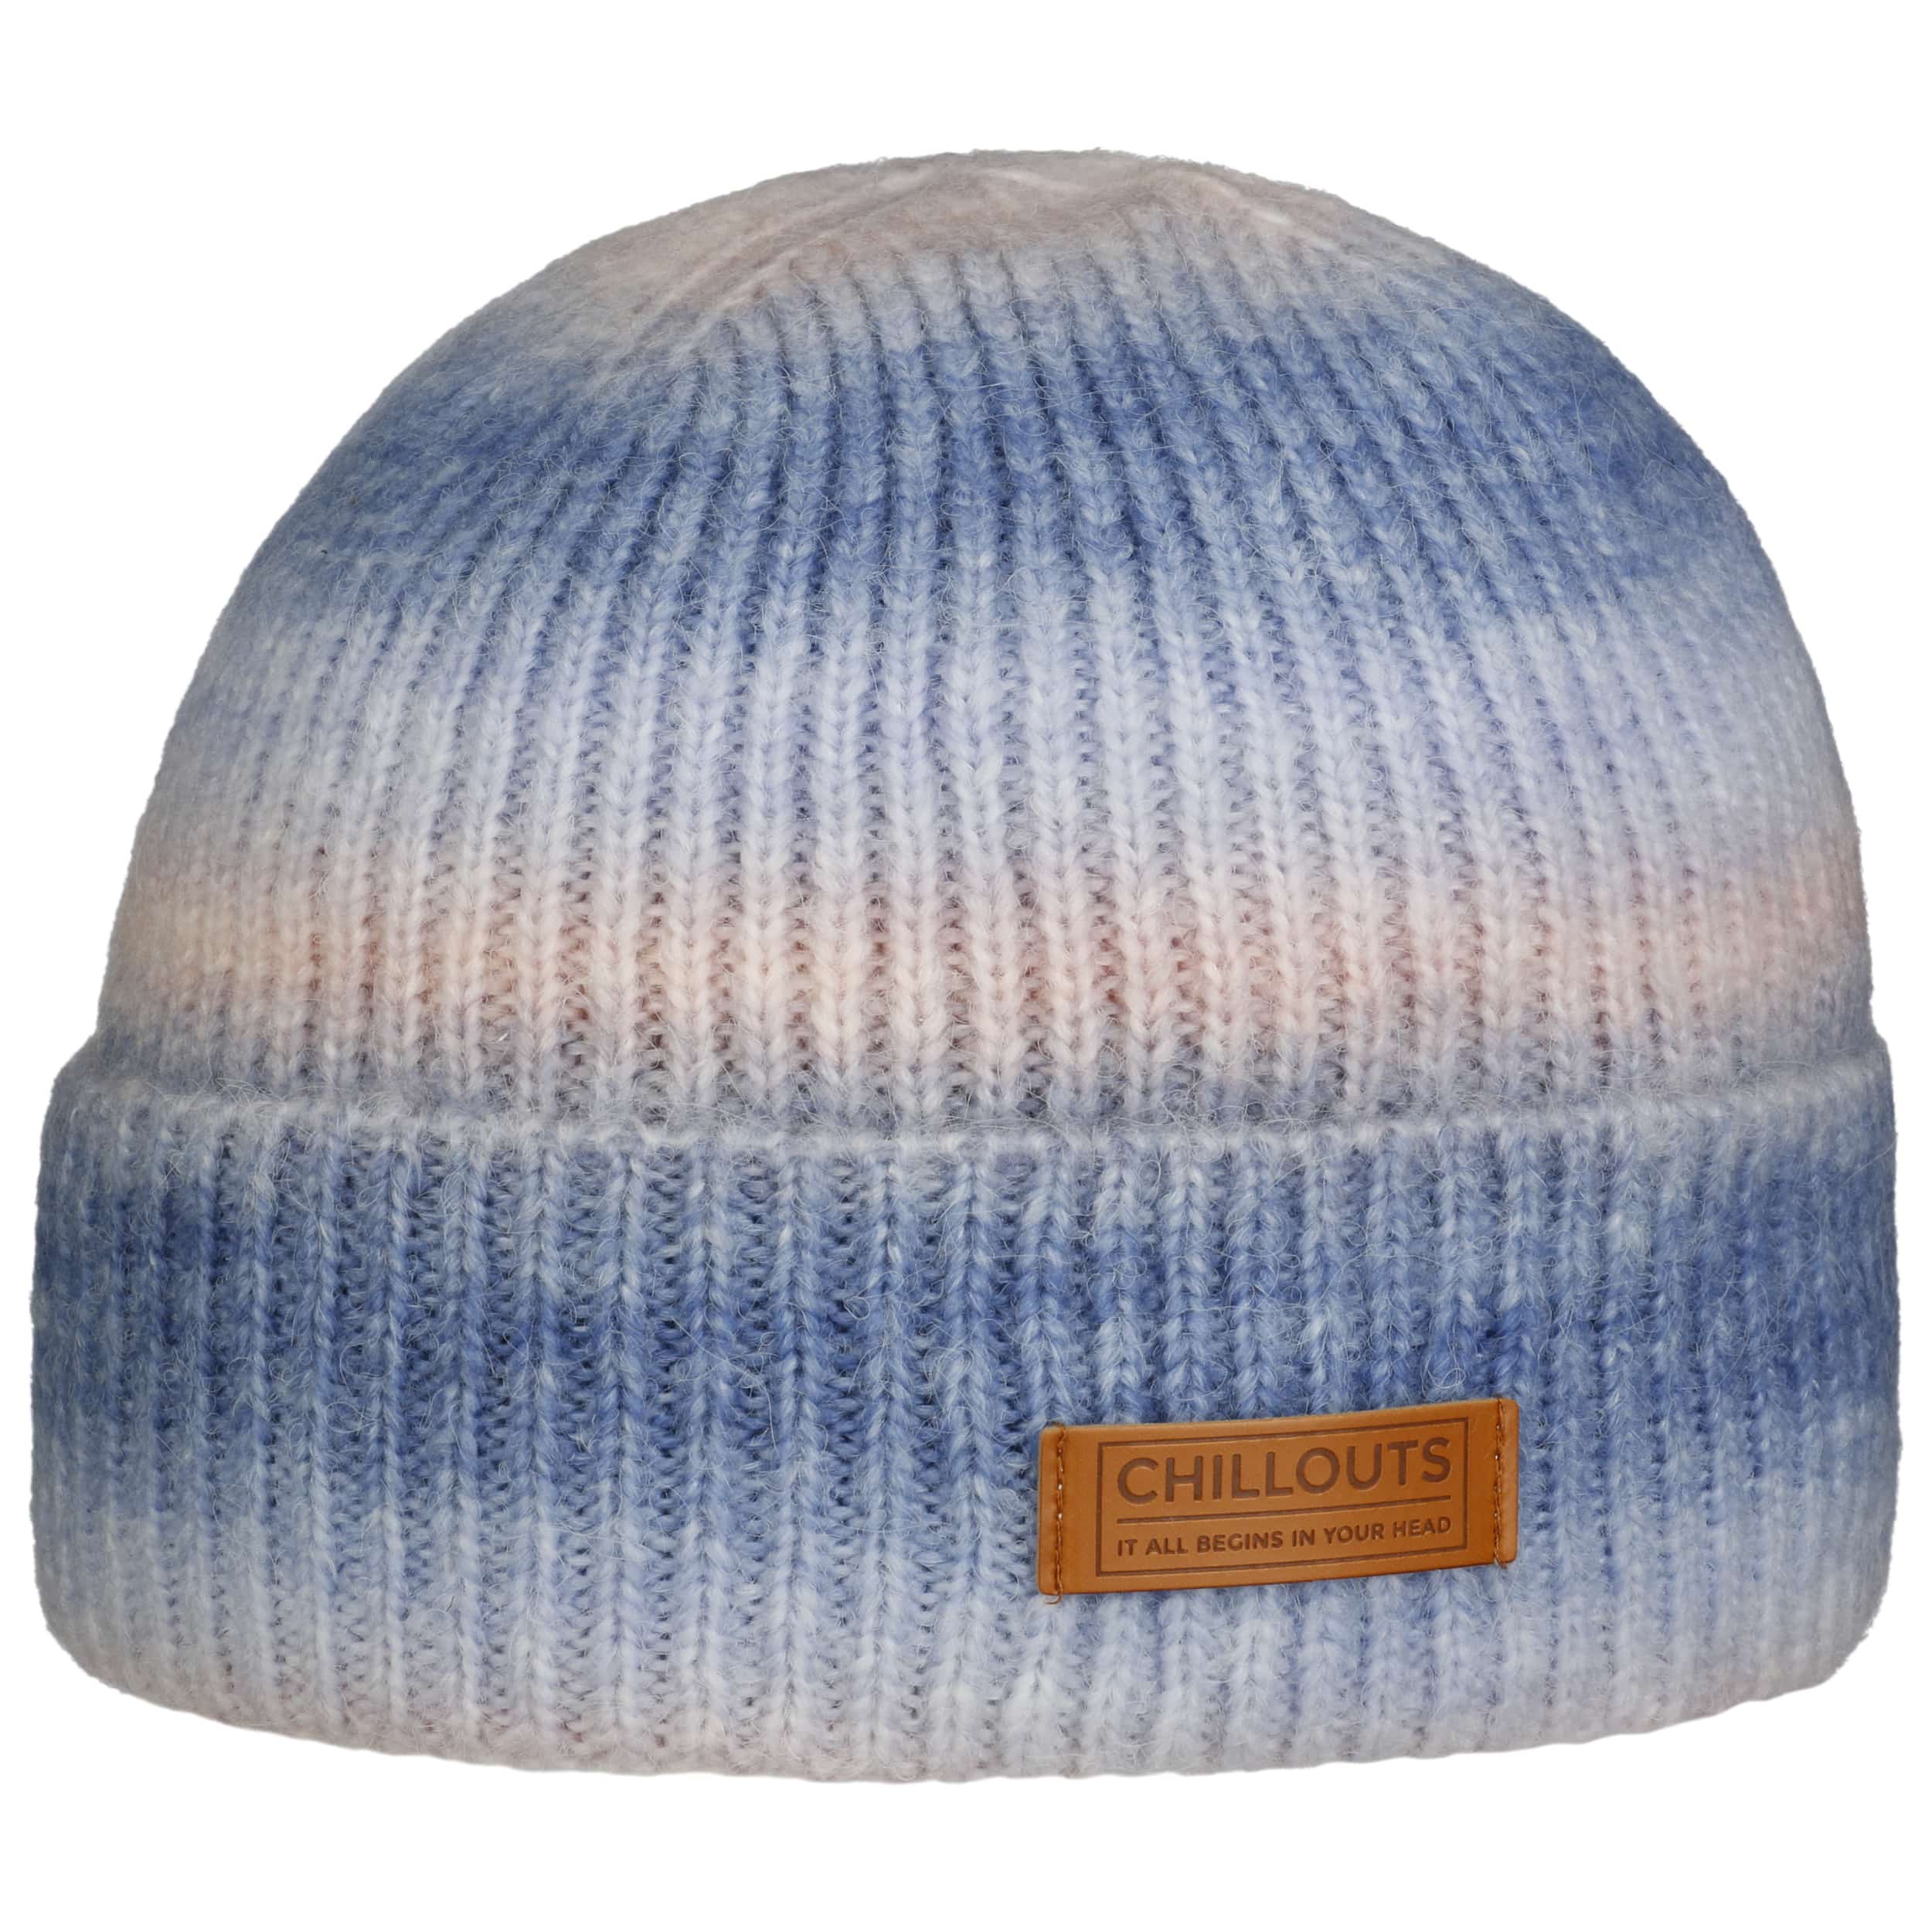 23,95 by £ - Beanie Chillouts Hat Rainbow